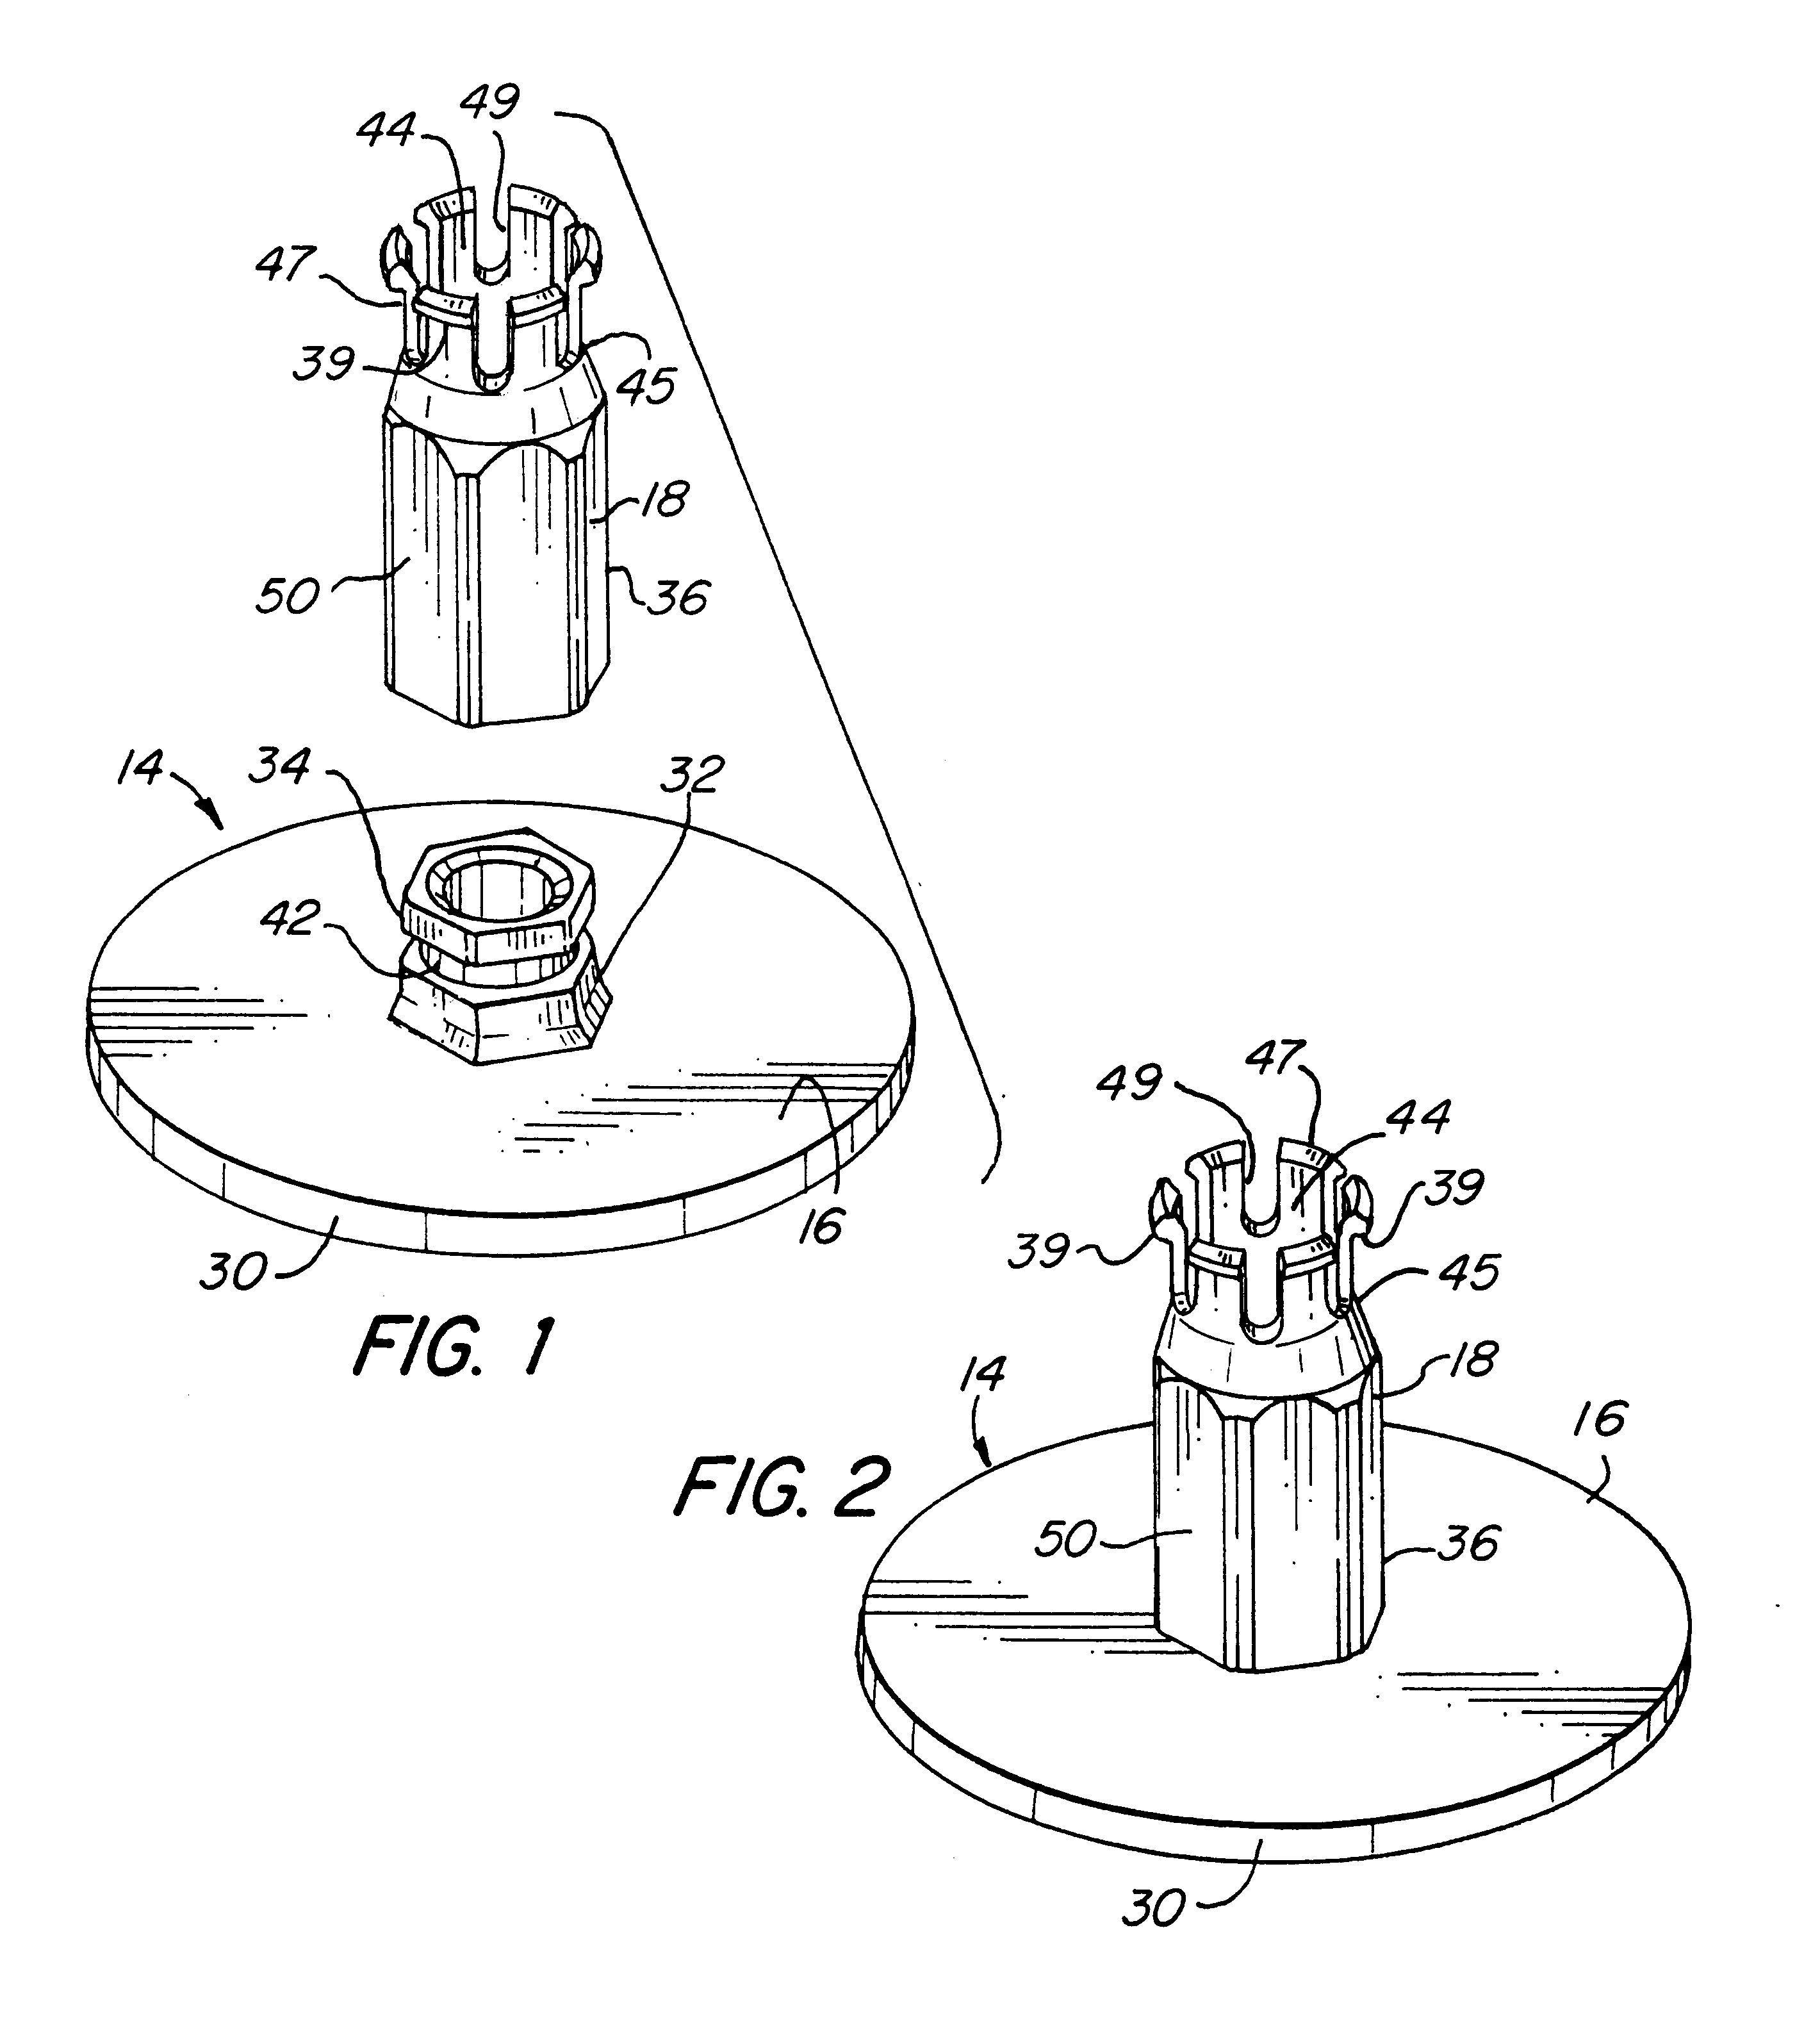 Shock mount assembly with polymeric thimble tube